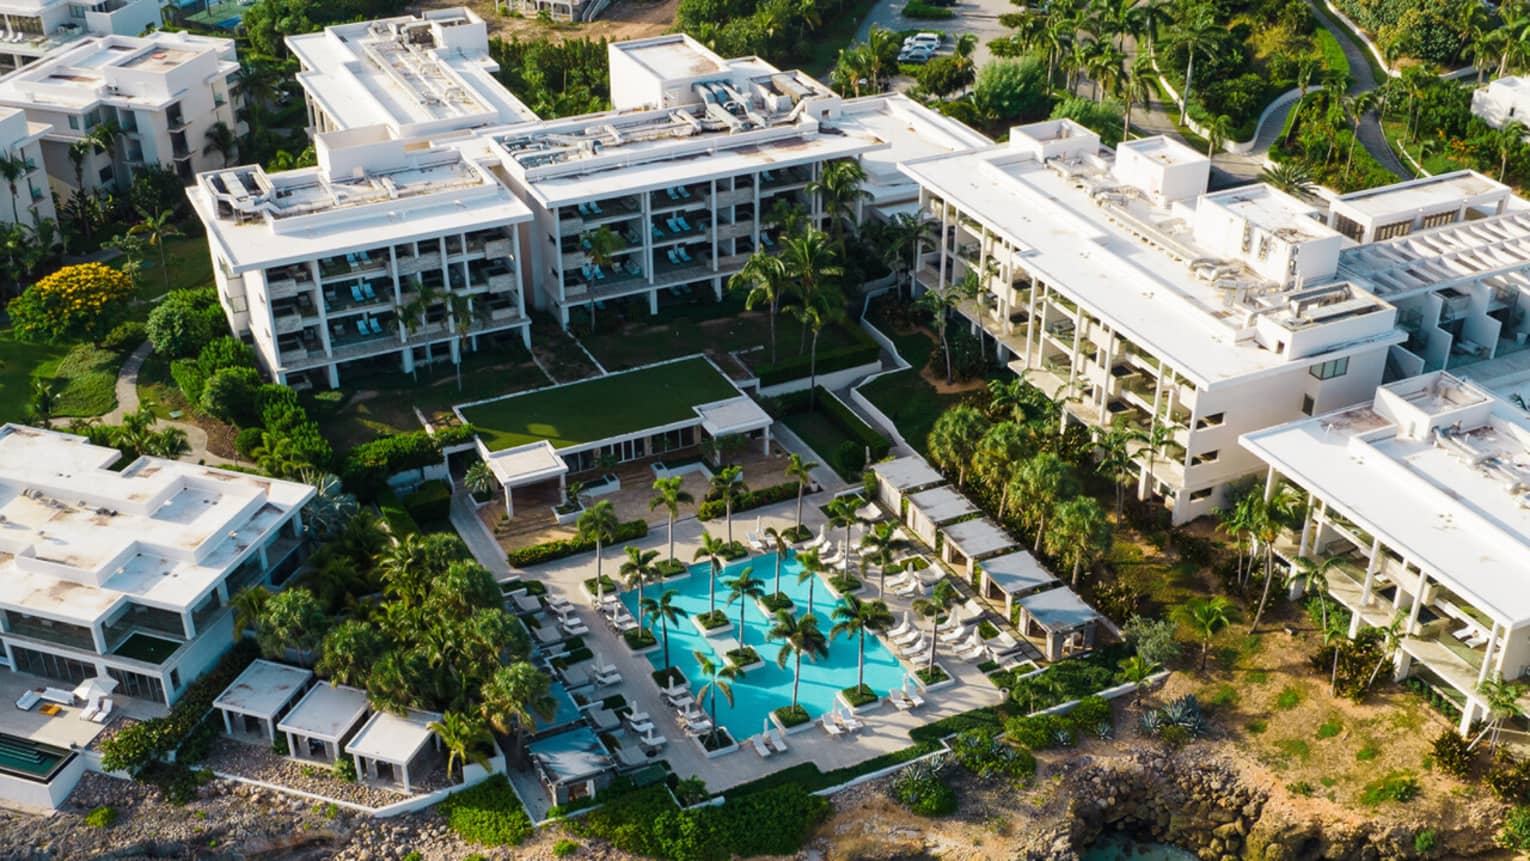 Aerial view of a modern hotel exterior and outdoor pool situated by a turquoise body of water